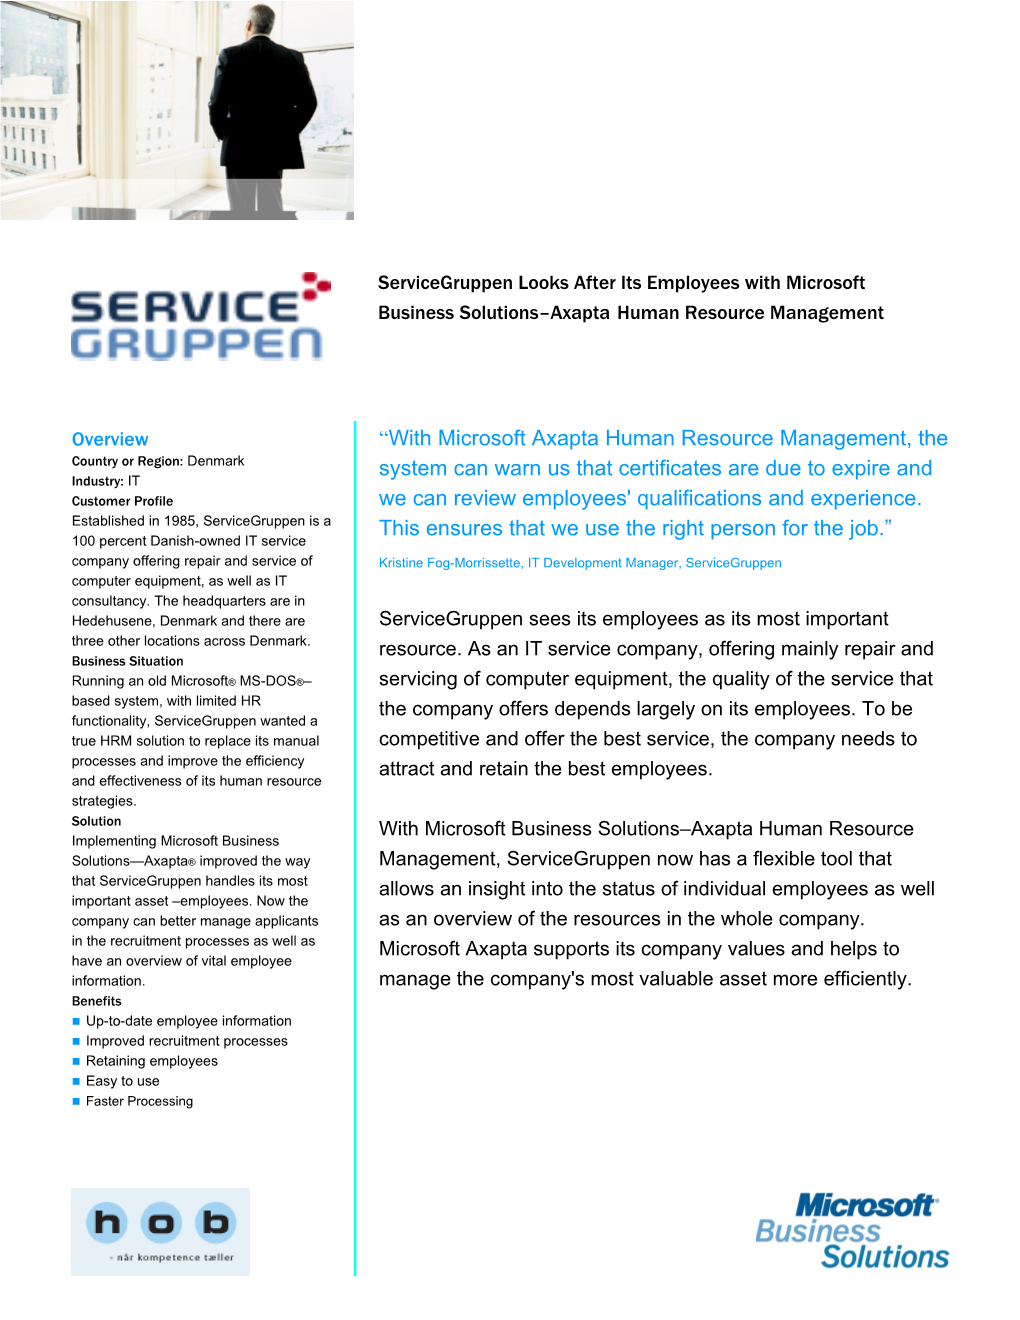 Servicegruppen Looks After Its Employees With Microsoft Business Solutions–Axapta Human Resource Management